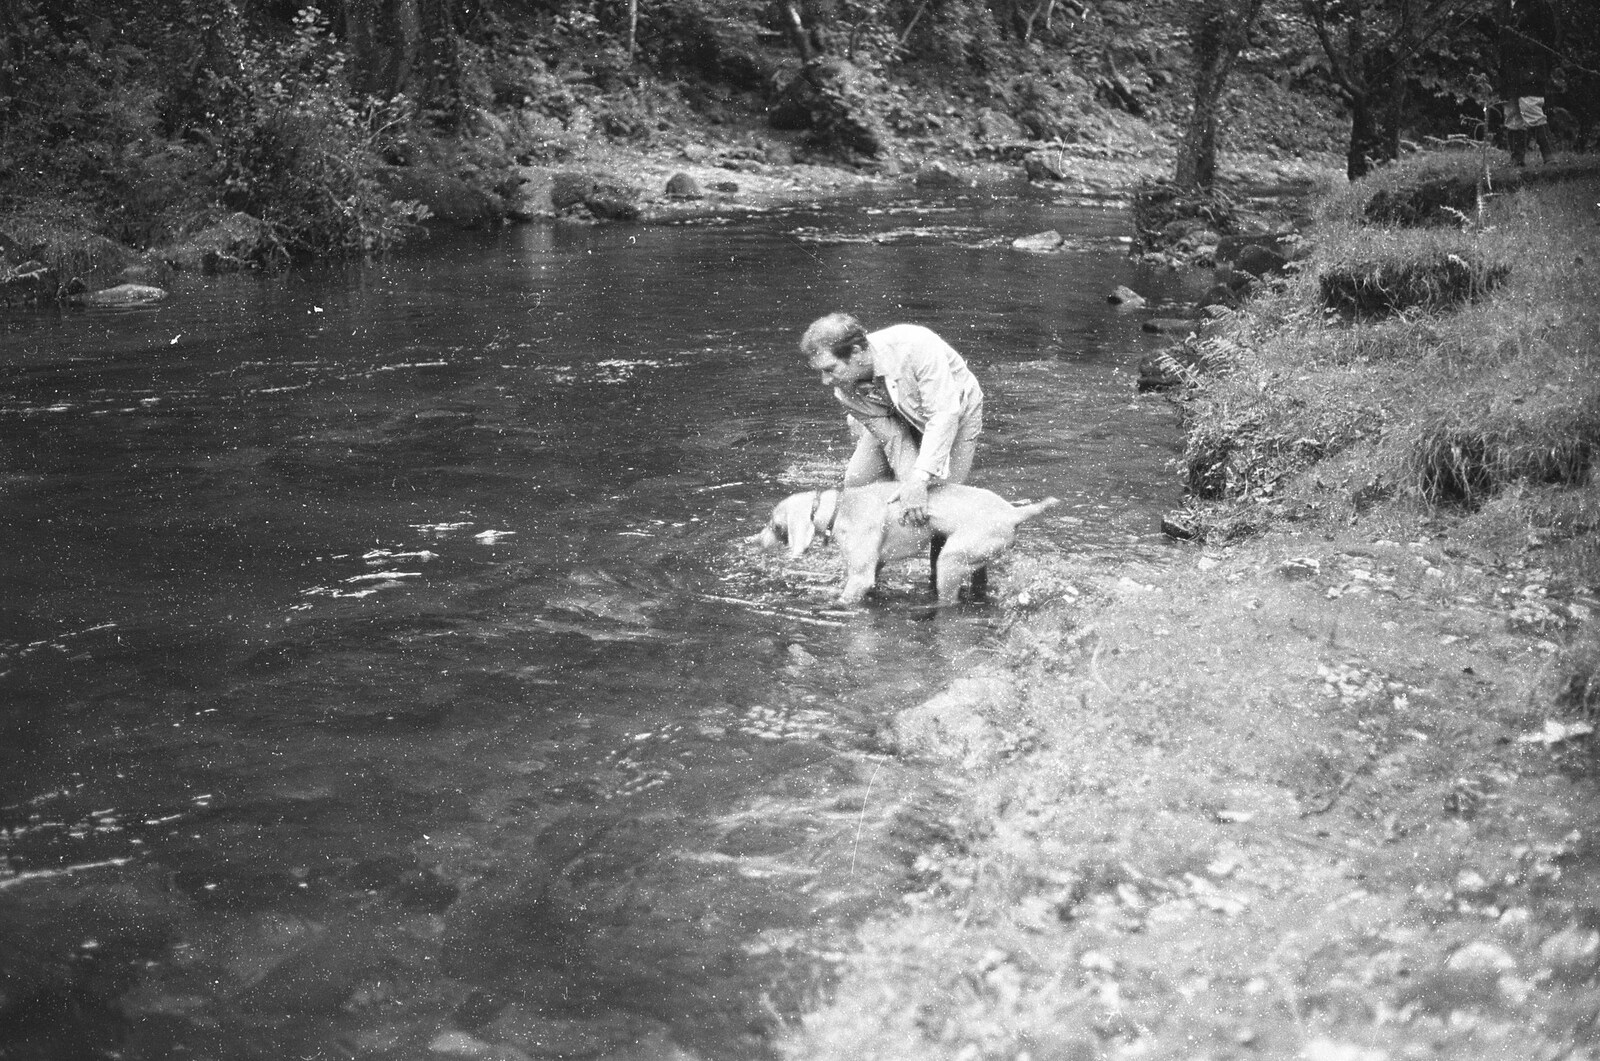 London Party and a Trip to Mother's, Hoo Meavy, Devon - 5th August 1993: Mike fishes Watson out of the river